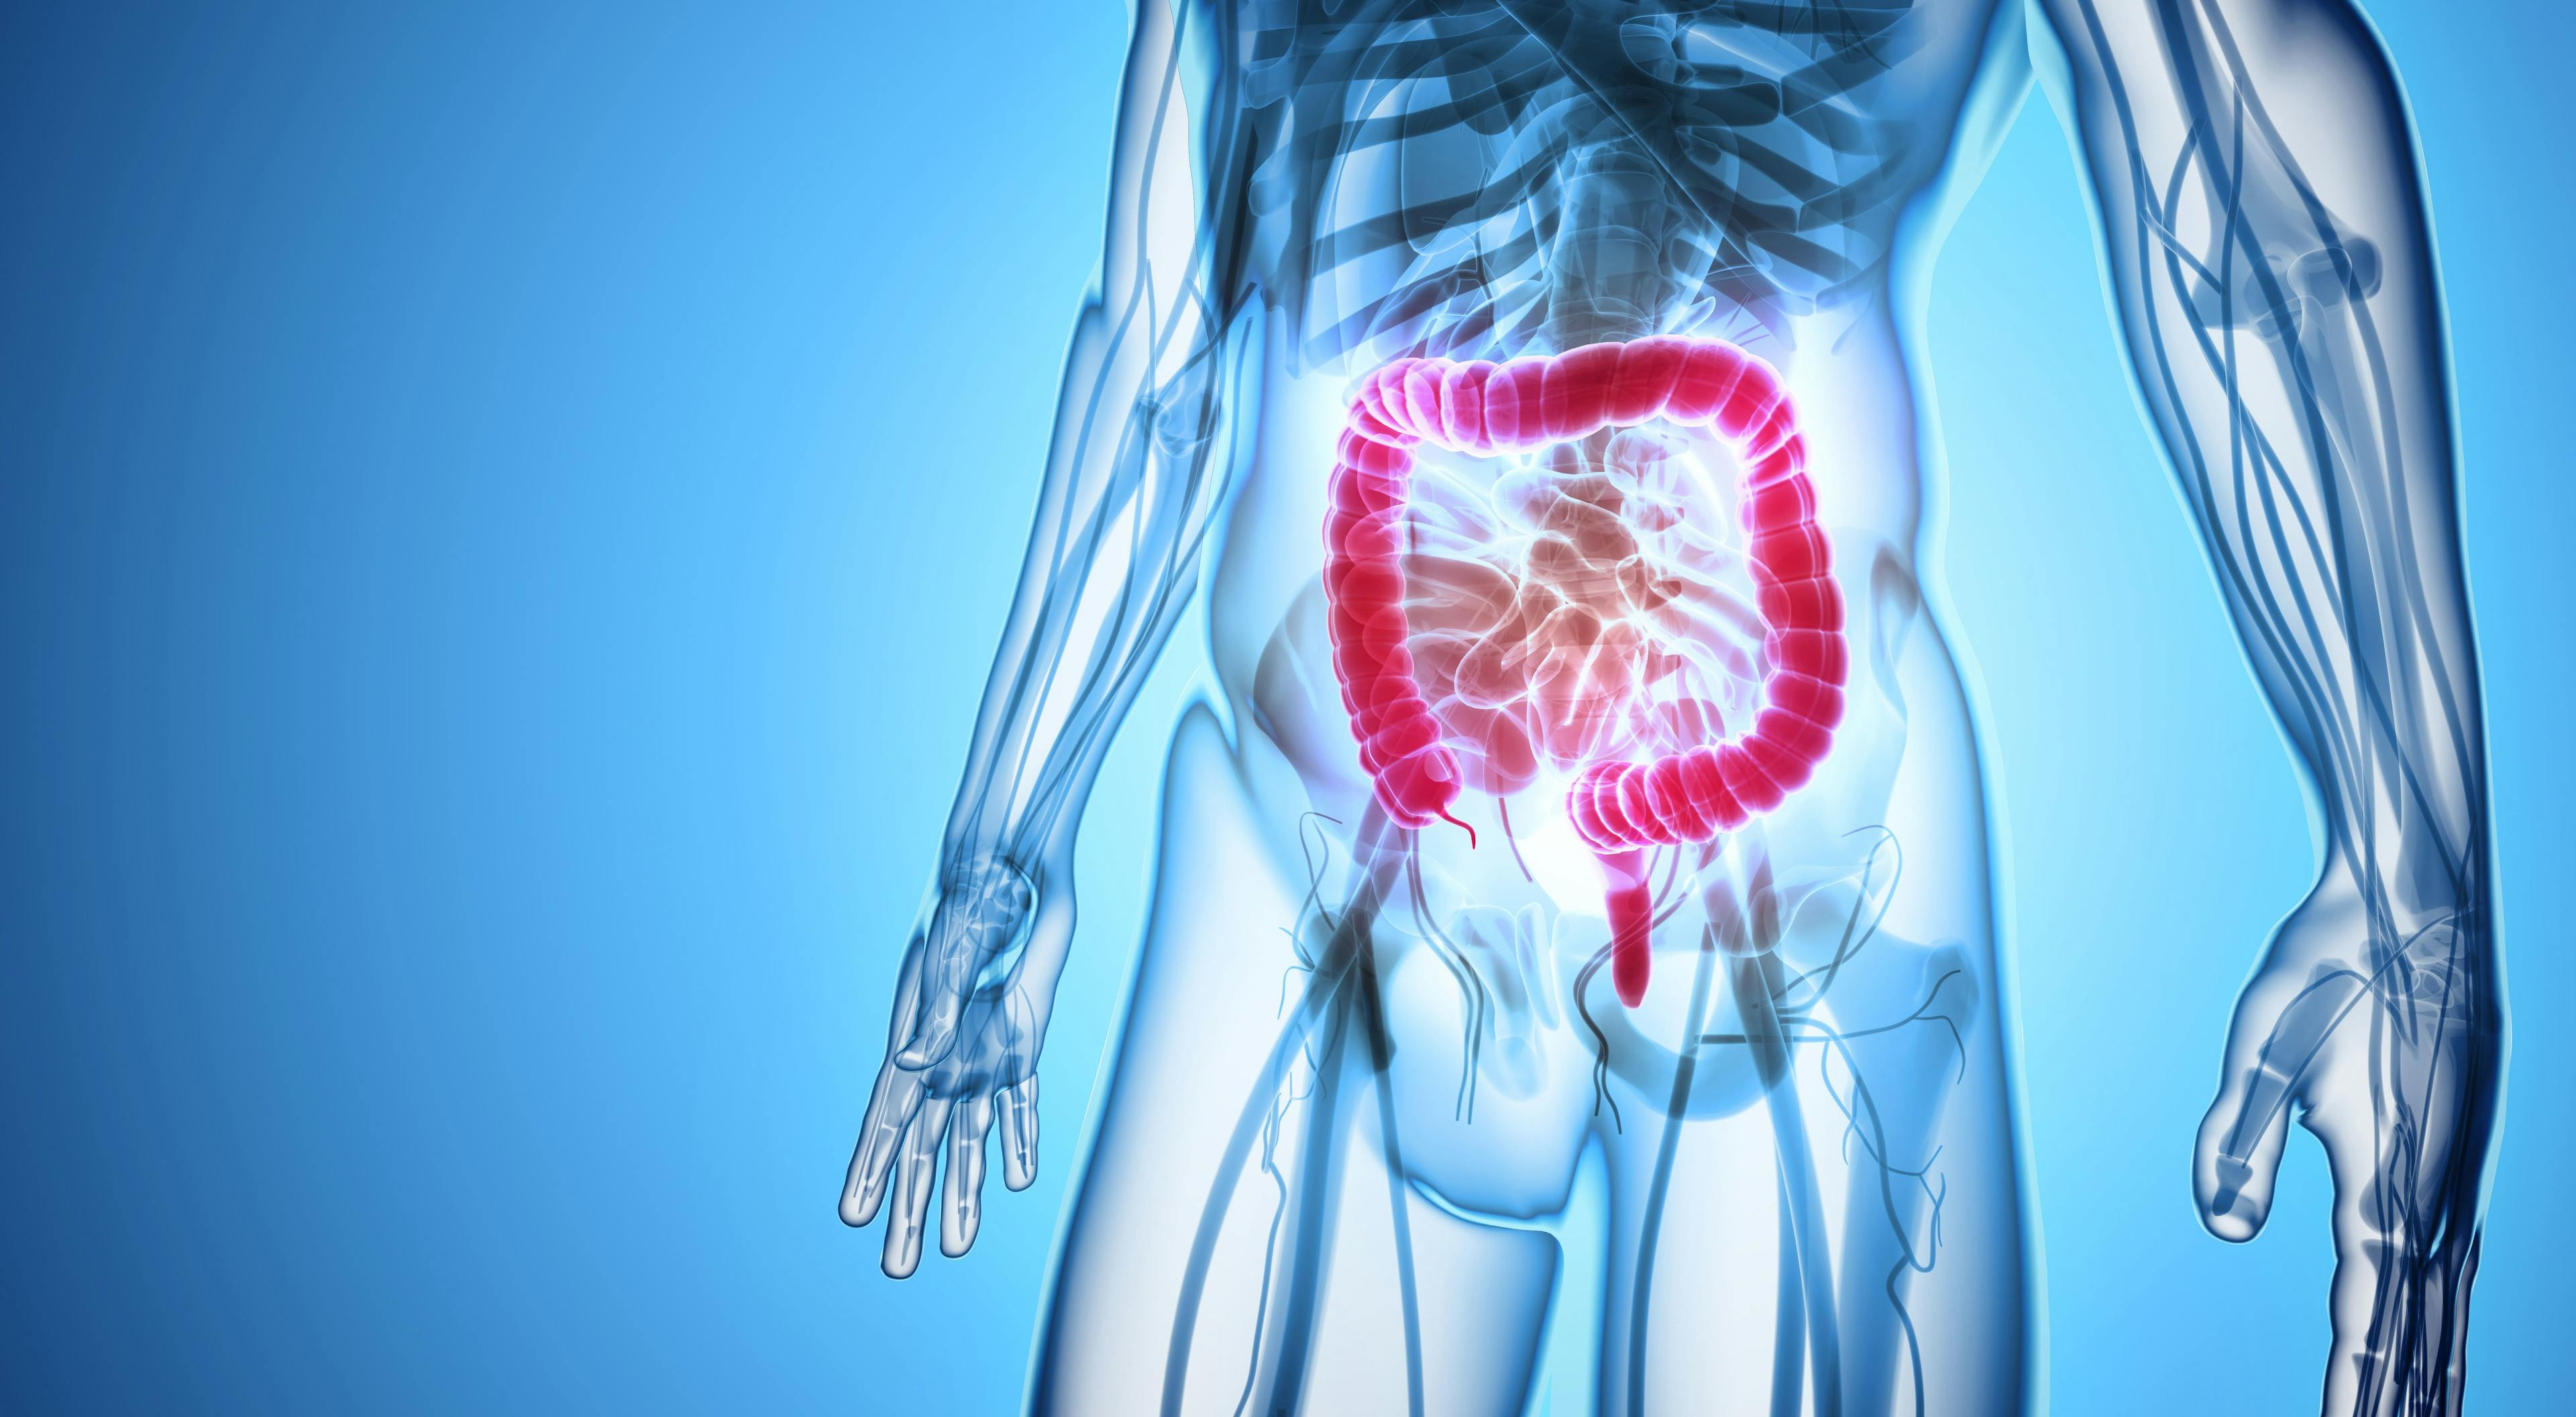 Metastatic Colorectal Cancer Treatments Continue to Change